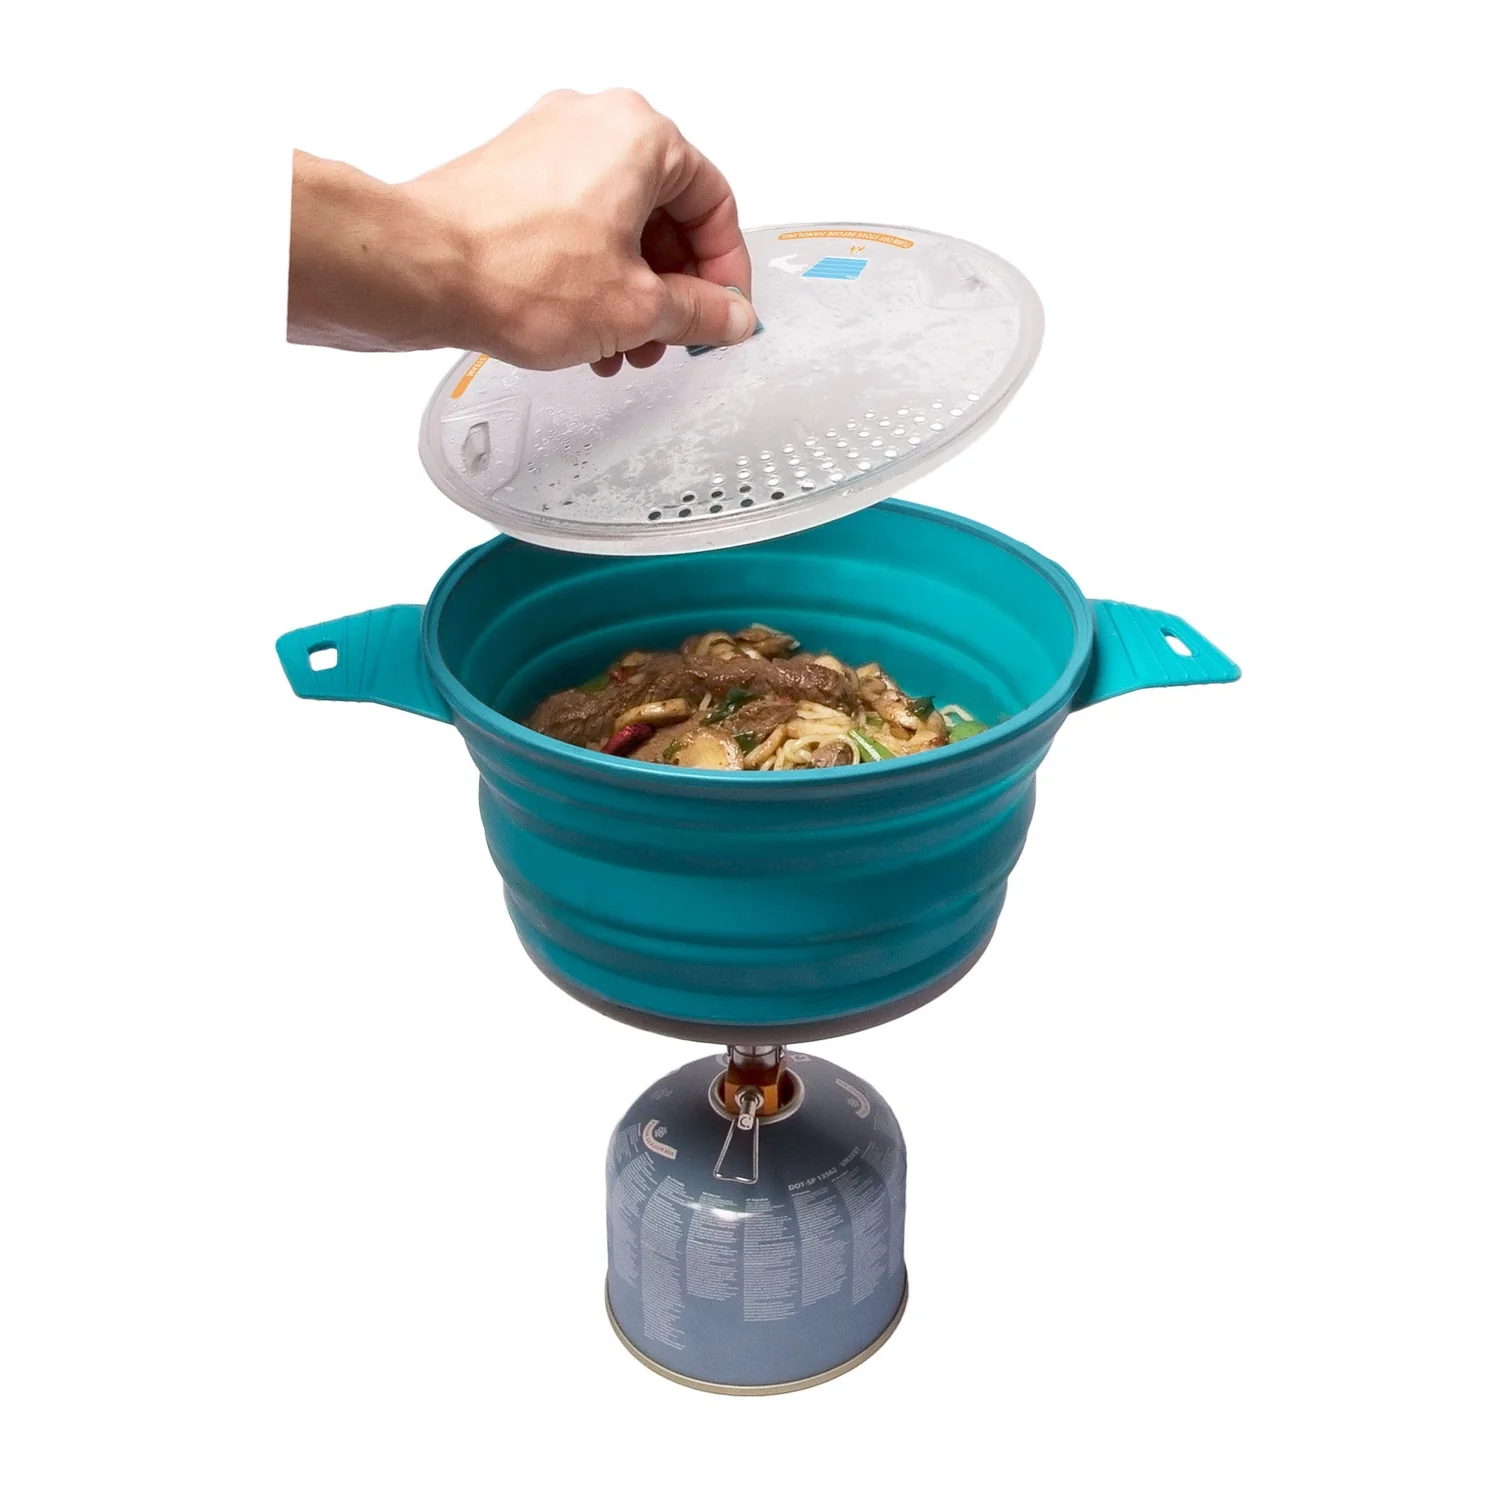 Collapsible-camp-cookware-pot-stove-blue_fe74f179-8500-44aa-8c2a-ec6a142339b7